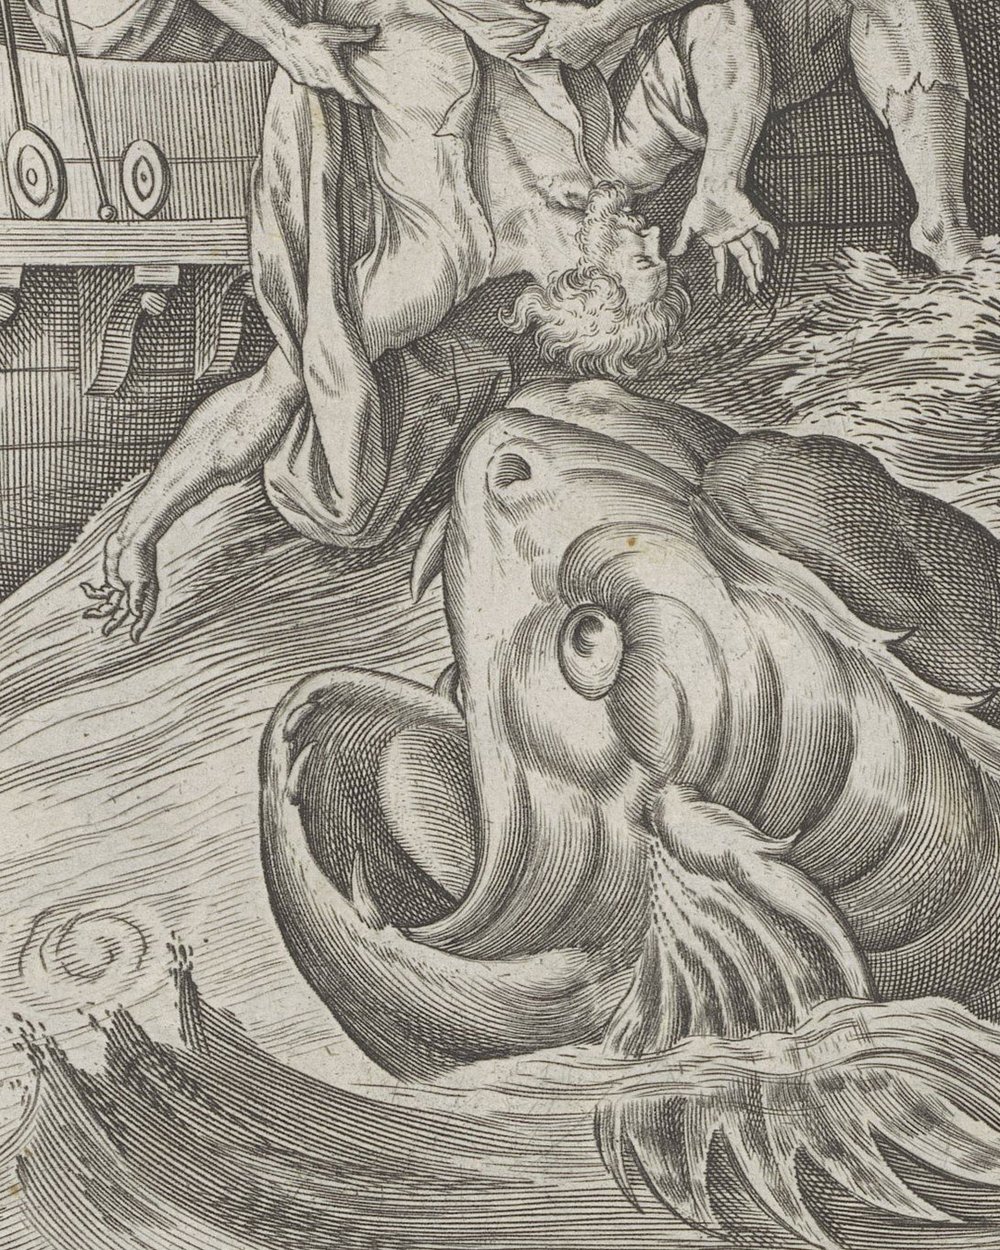 ''Jonah is thrown into the sea'' (1646)